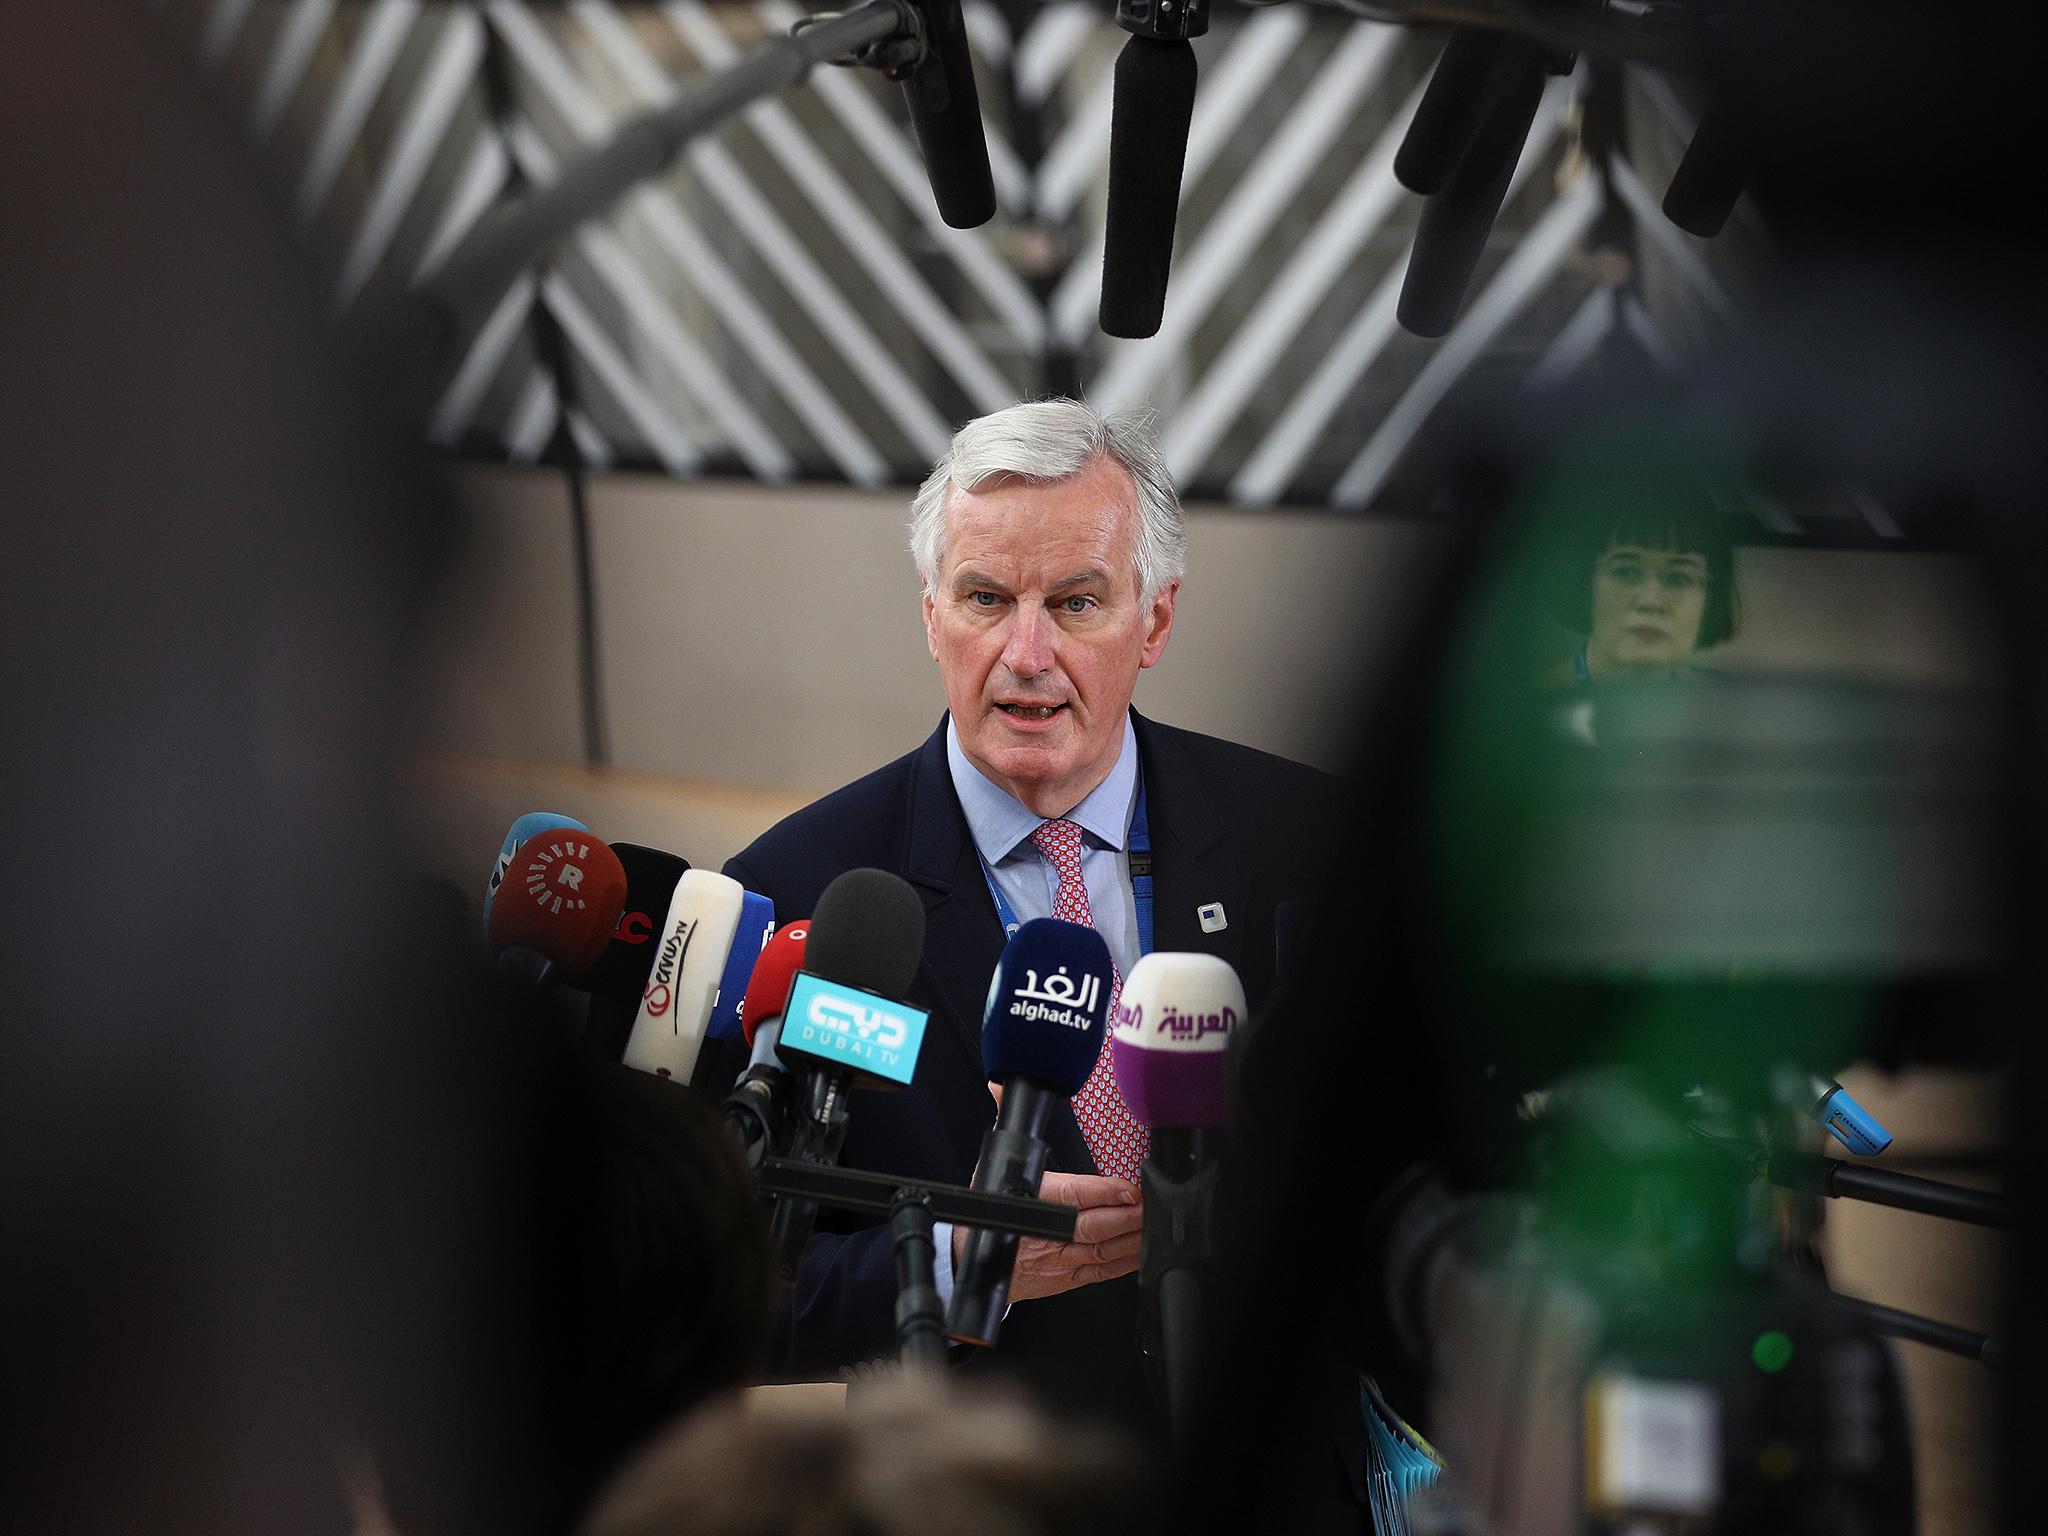 Michel Barnier has expressed his frustration about the tone of the Brexit talks this week